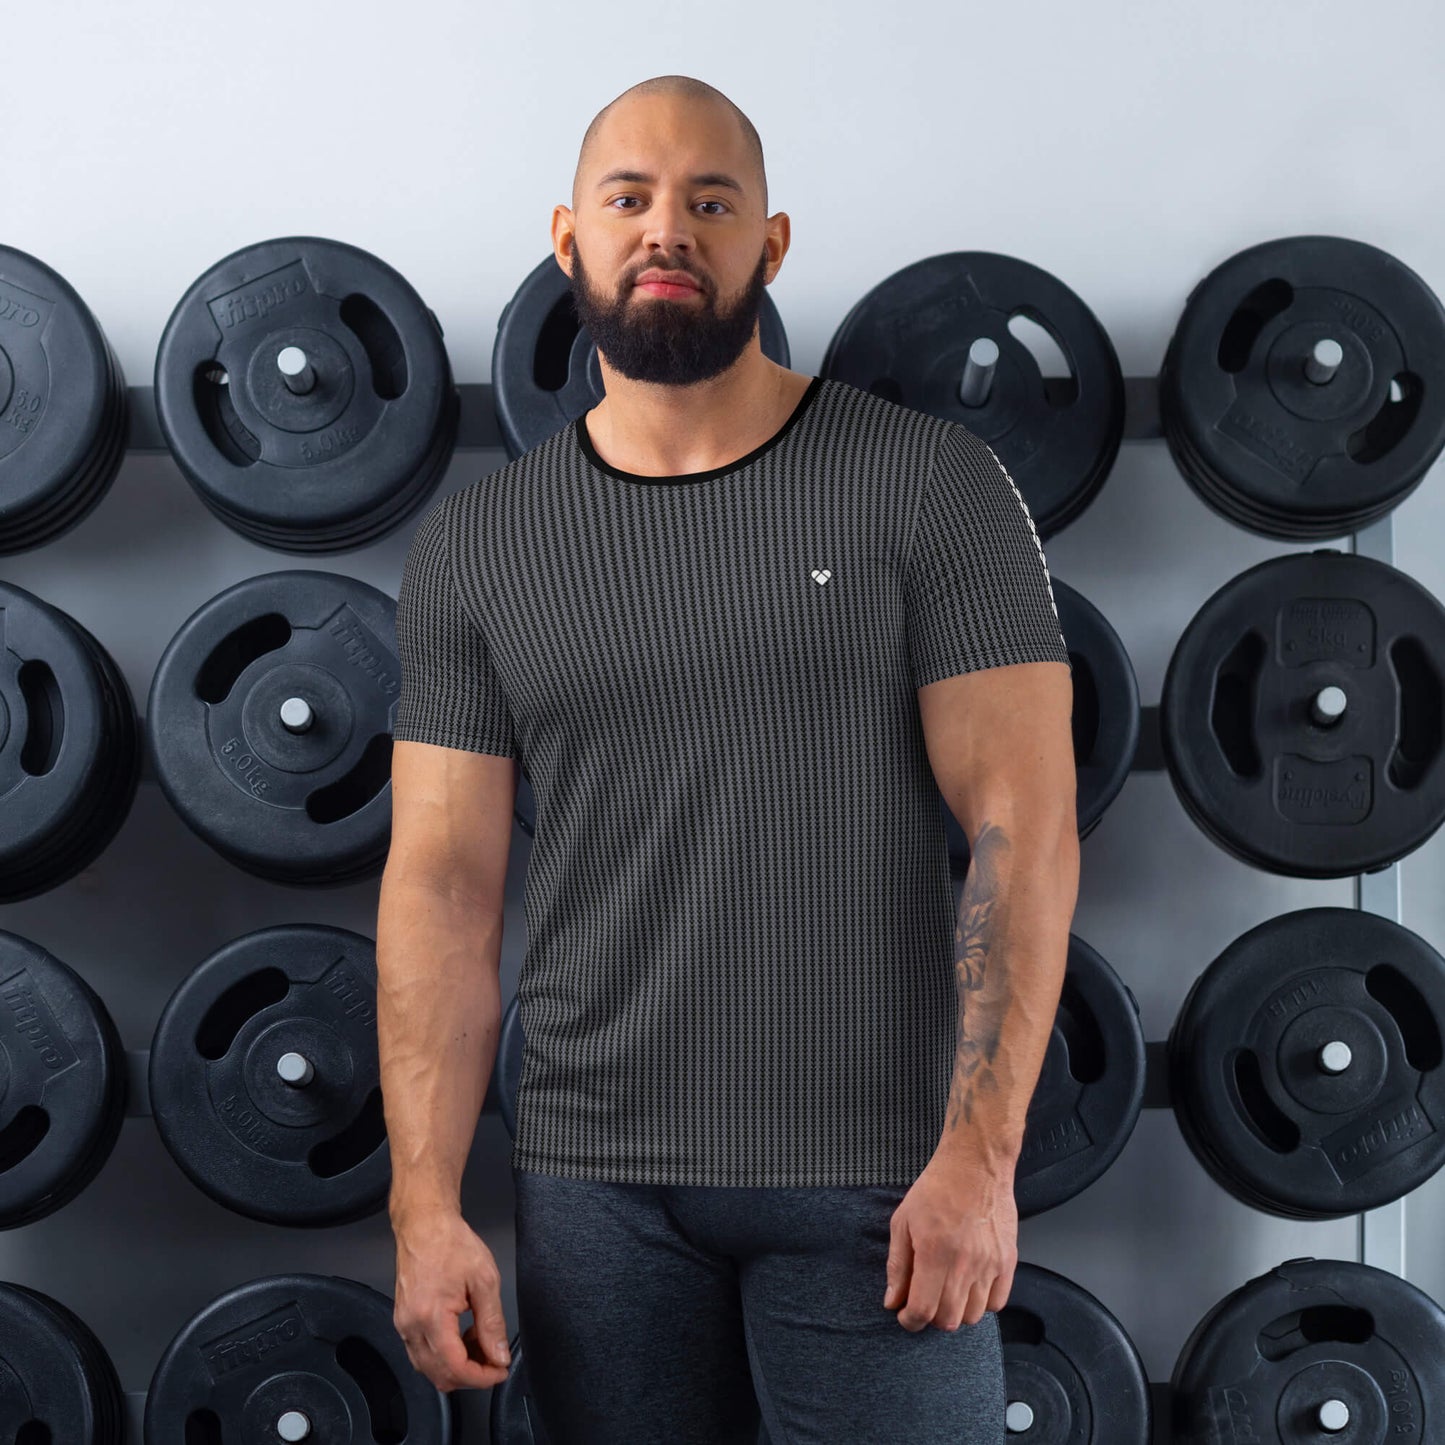 model gym, Dual-shade lovogram pattern sport shirt for men, featuring small geometric hearts in black and two shades of gray. CRiZ AMOR's Black Heartthrob Sport Shirt